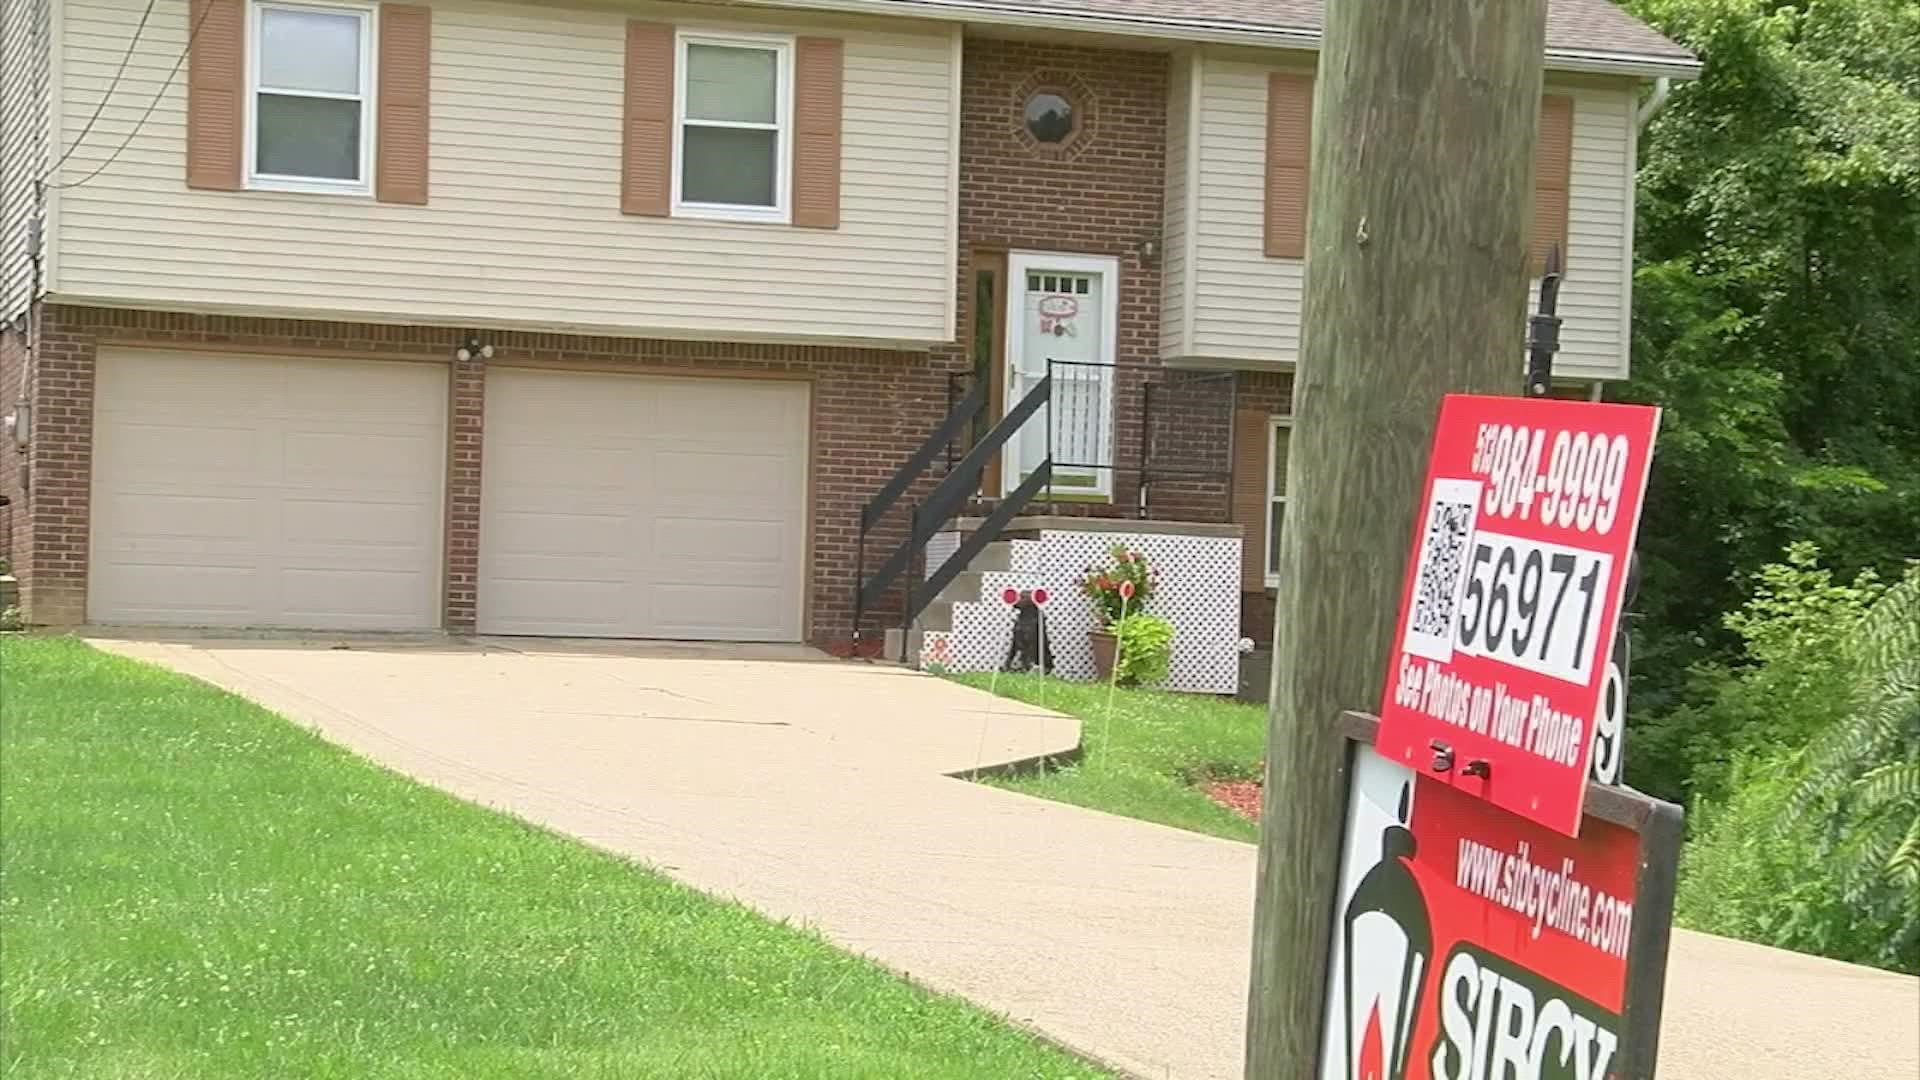 Rising mortgage rates mean the housing market is heating up as buyers look to secure their home before prices go up.